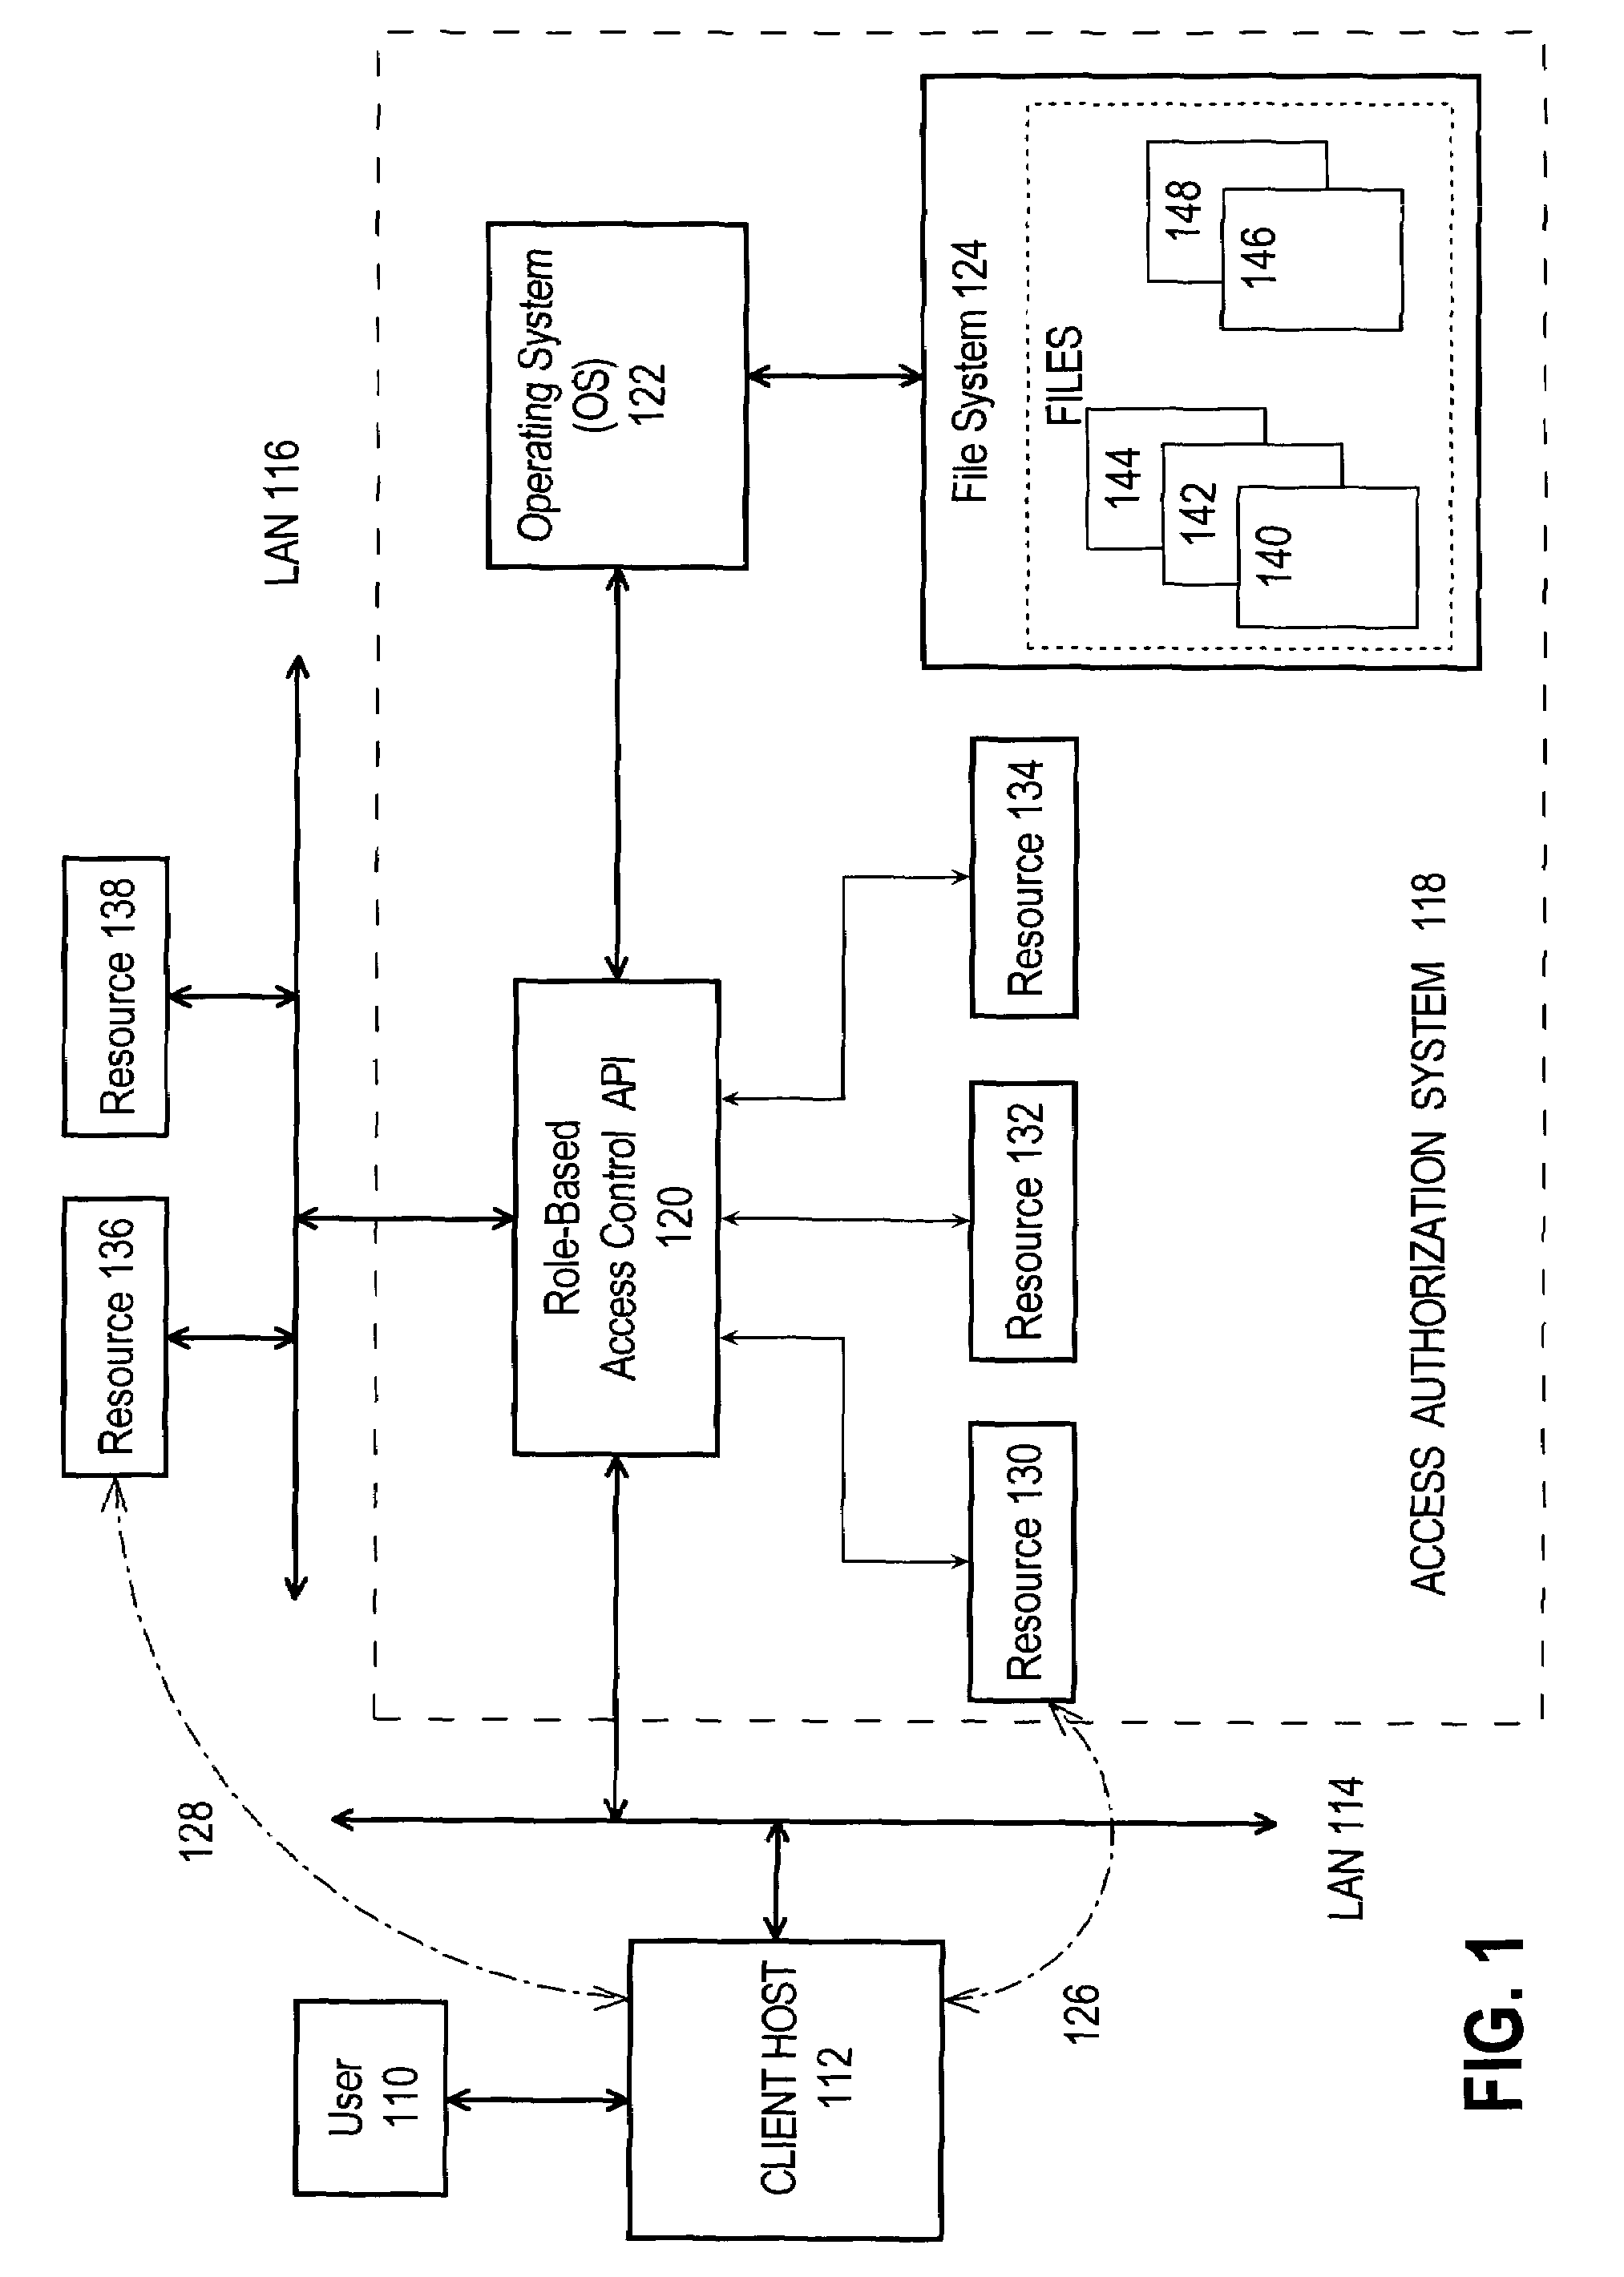 Role-based access control enforced by filesystem of an operating system